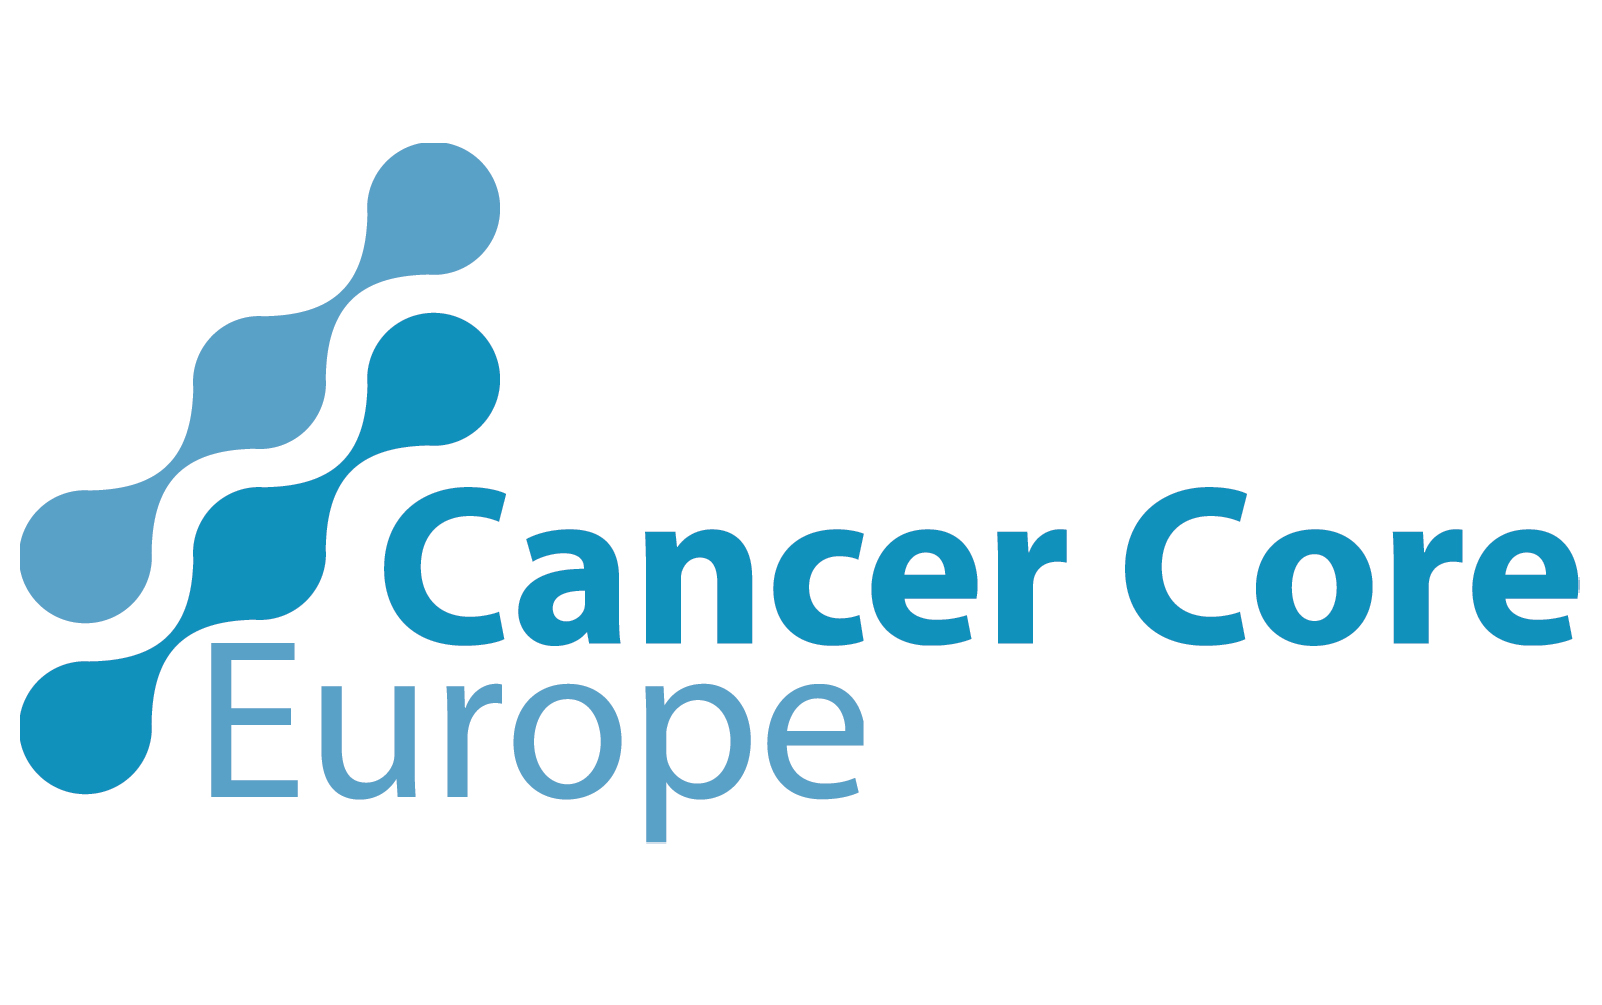 Goals, Challenges, and Progress of Cancer Core Europe